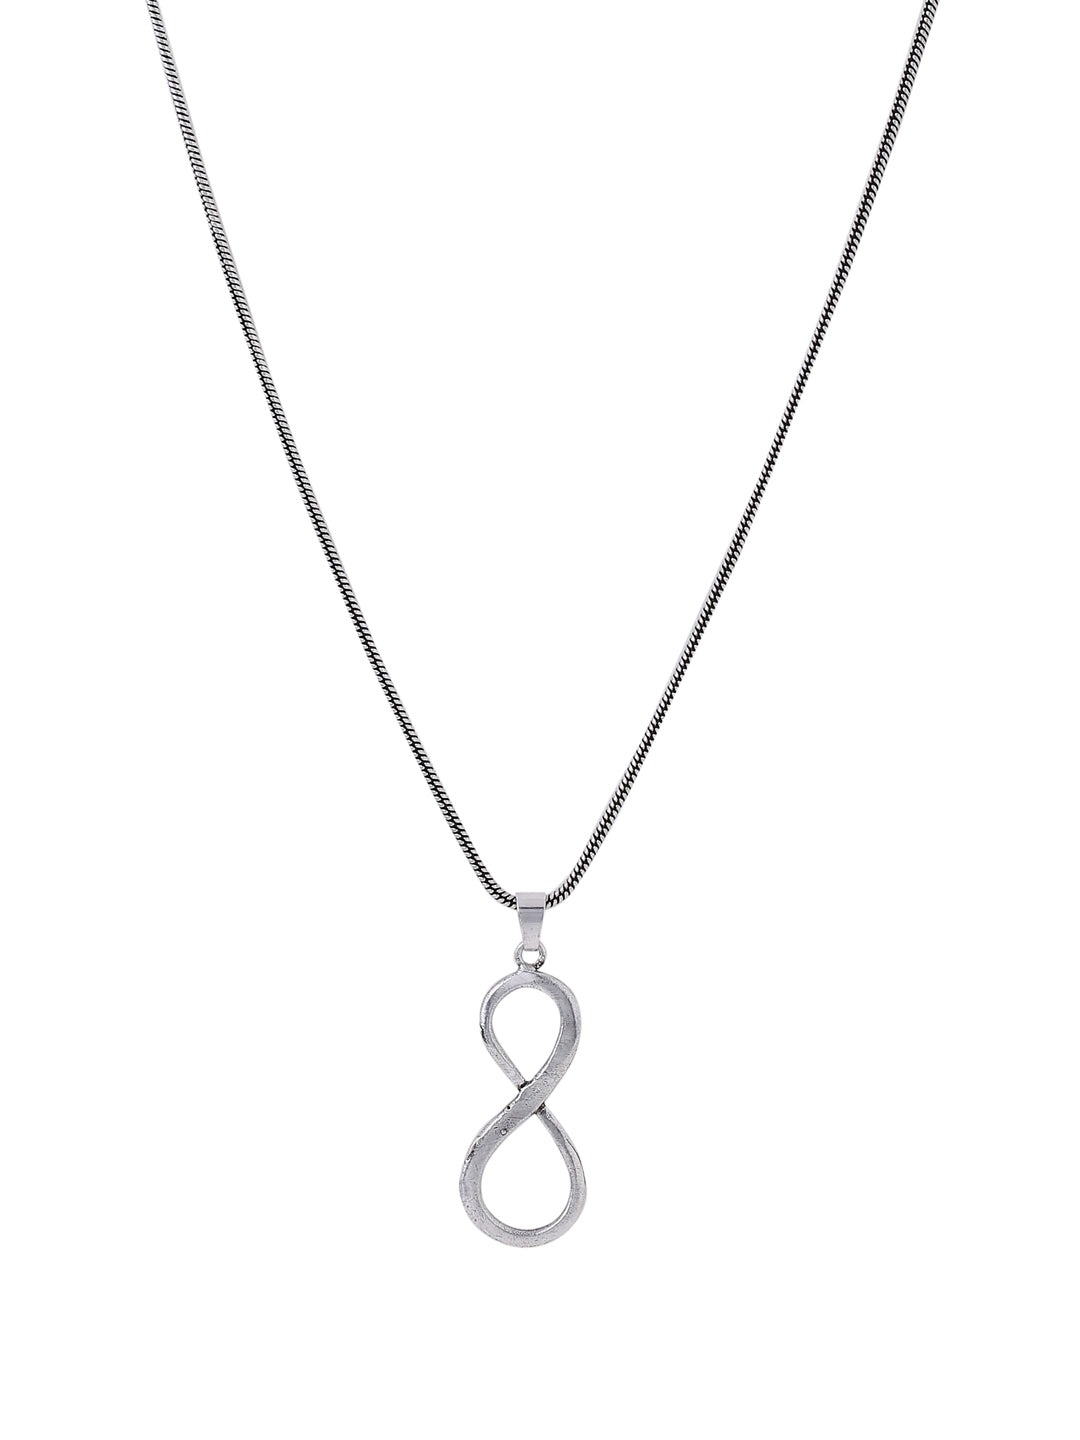 Oxidised Silver Plated Minimal Pendant with Chain-Viraasi